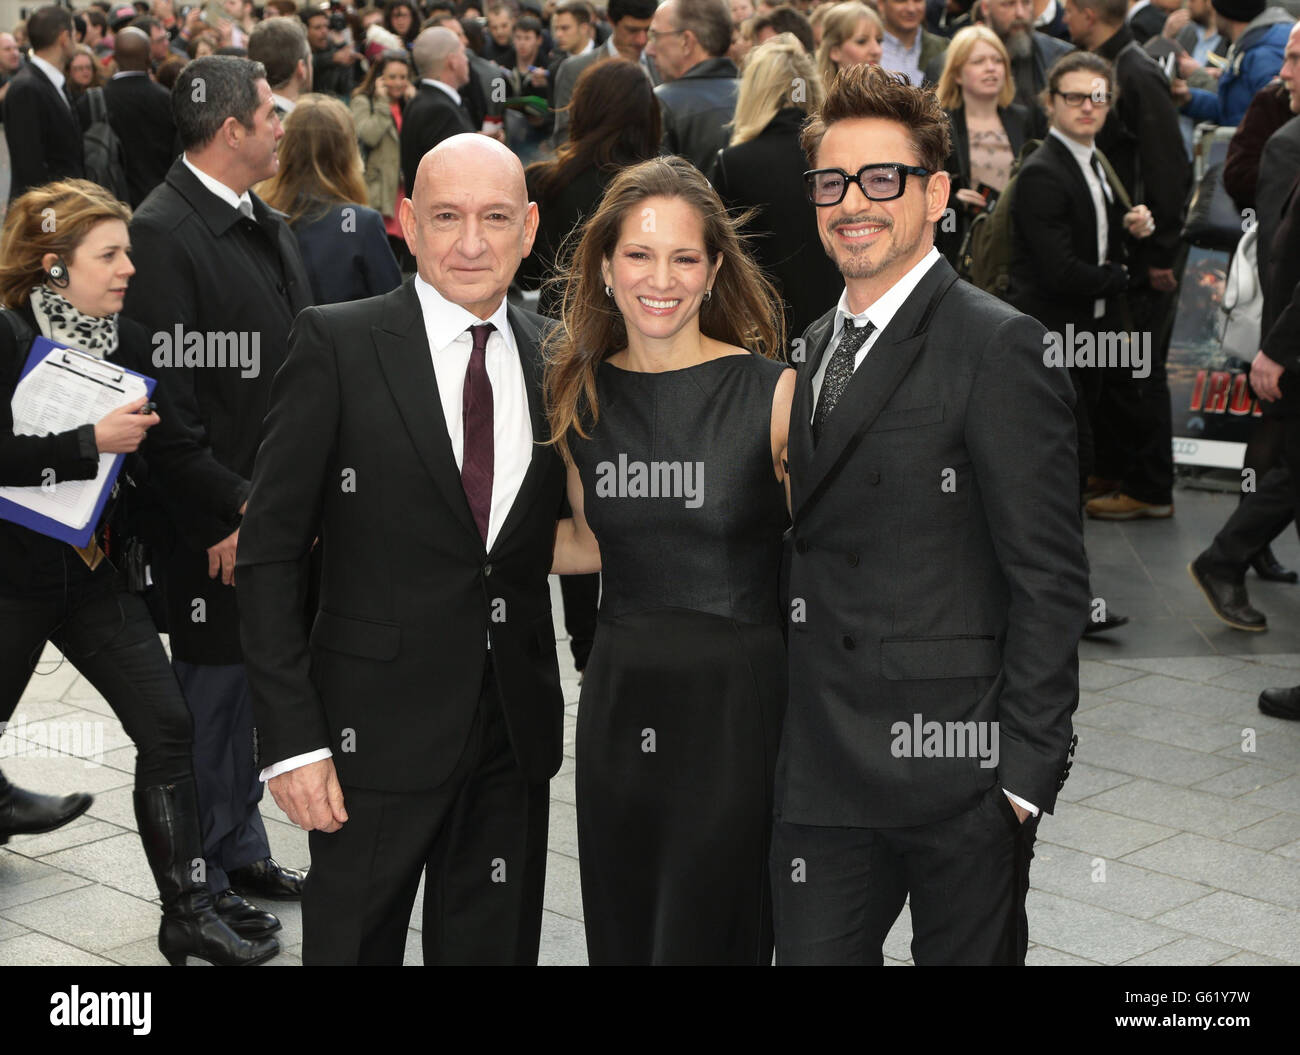 Sir Ben Kingsley, Susan Downey and Robert Downey Jr arriving for the premiere of Iron Man 3 at the Odeon Leicester Square, London. Stock Photo